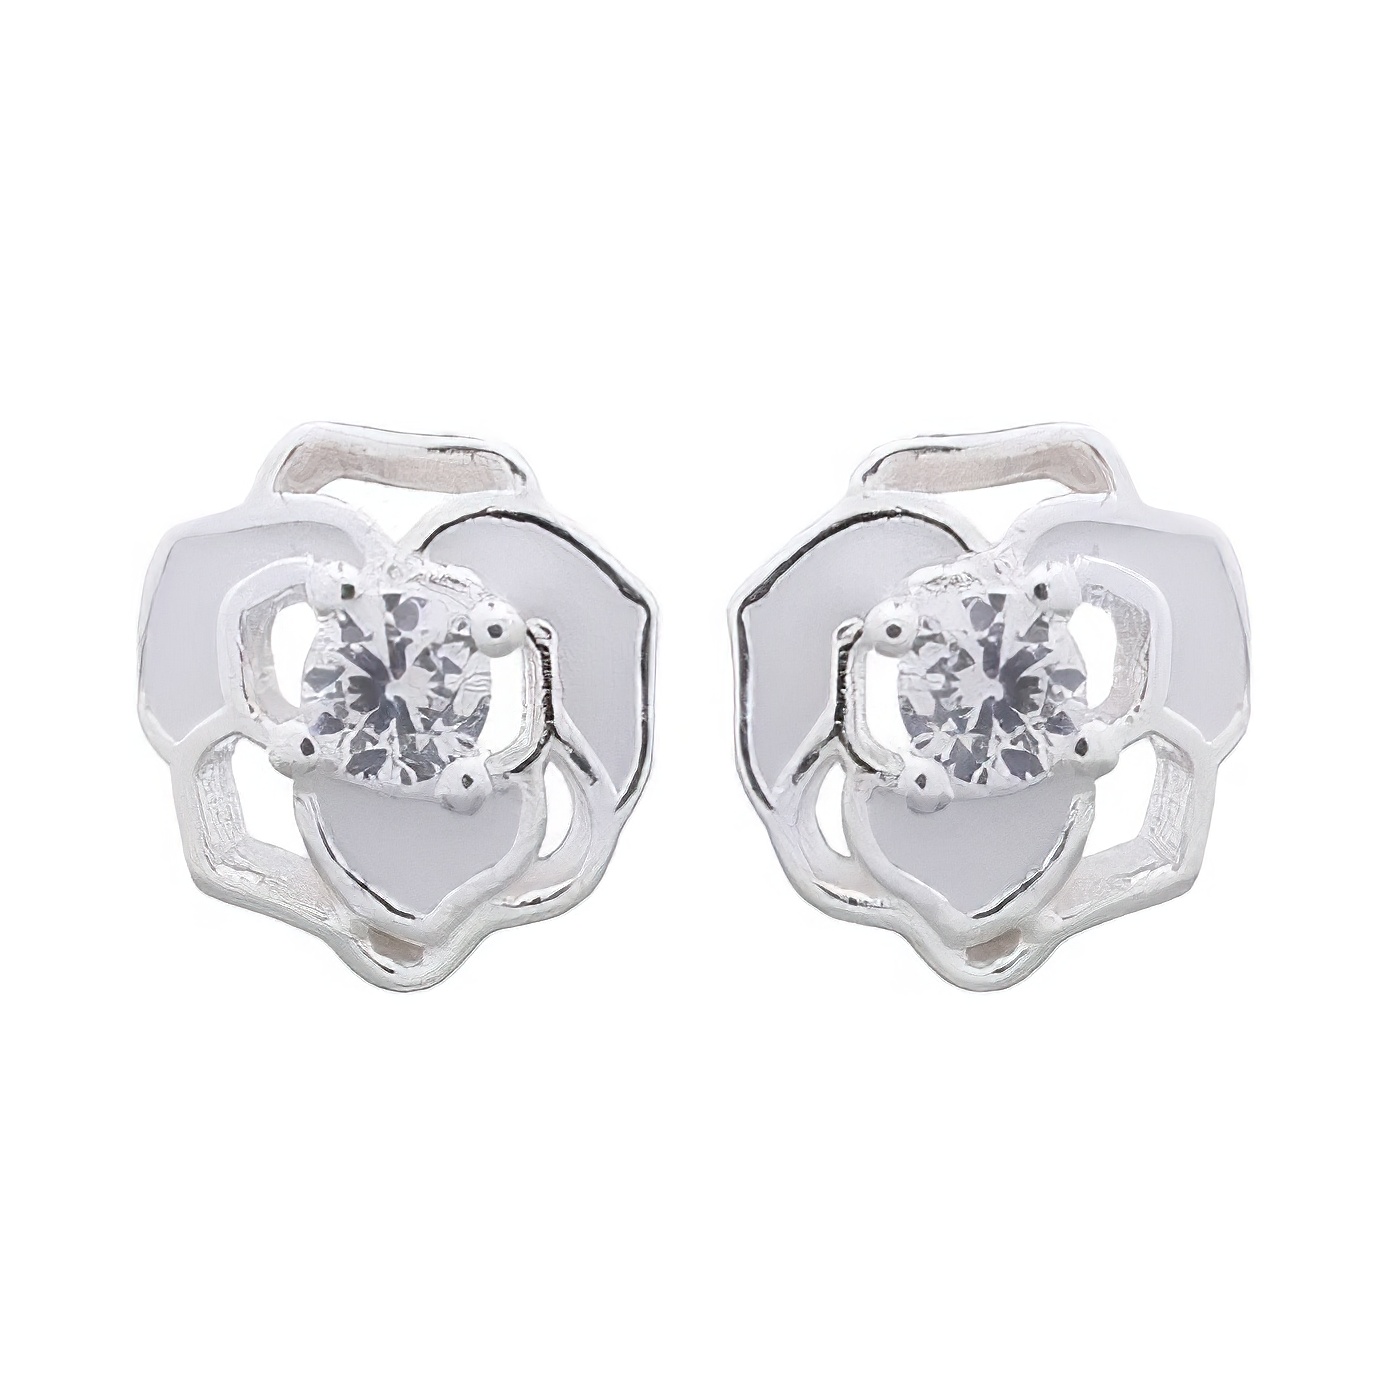 Dainty Flower Enamel Matched With CZ Stud Earrings 925 Silver by BeYindi 